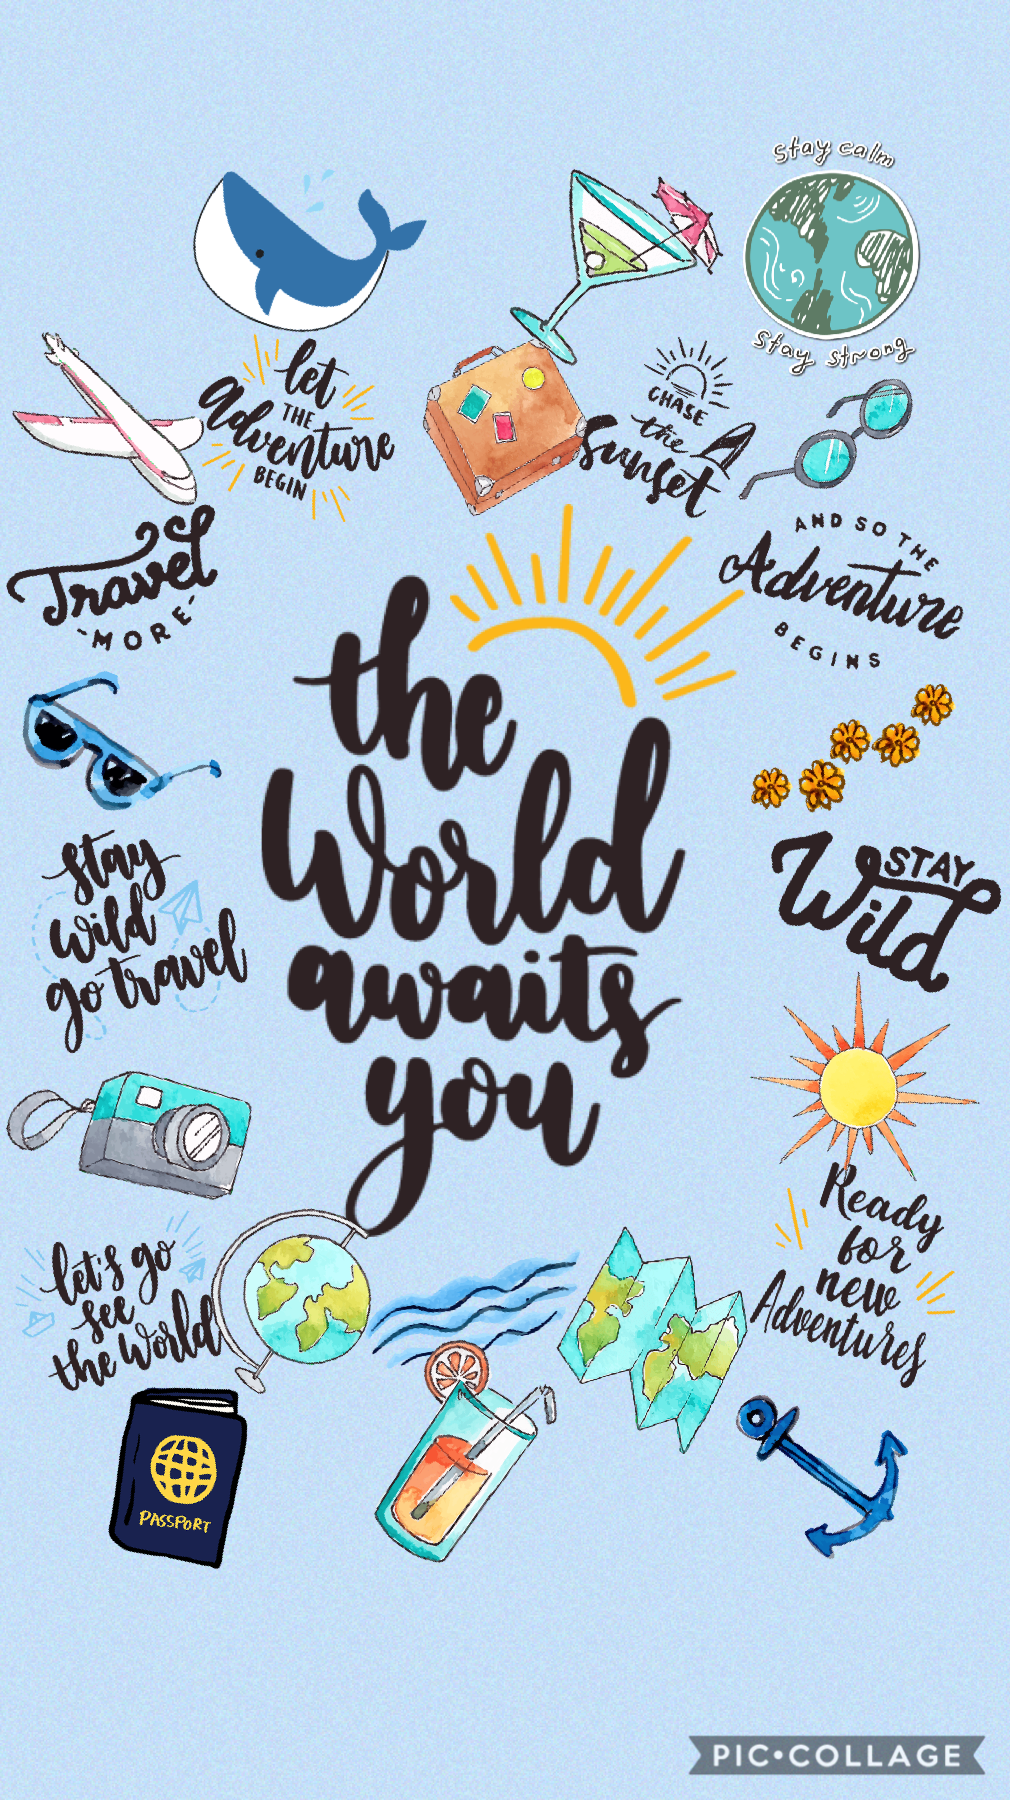                  ☁️tap☁️
THE WORLD AWAITS YOU!! With quarantine coming to an end and summer just beginning, I encourage traveling! I’ve already been to the beach and I was so relived and it felt like my life was almost back to normal! Love you!